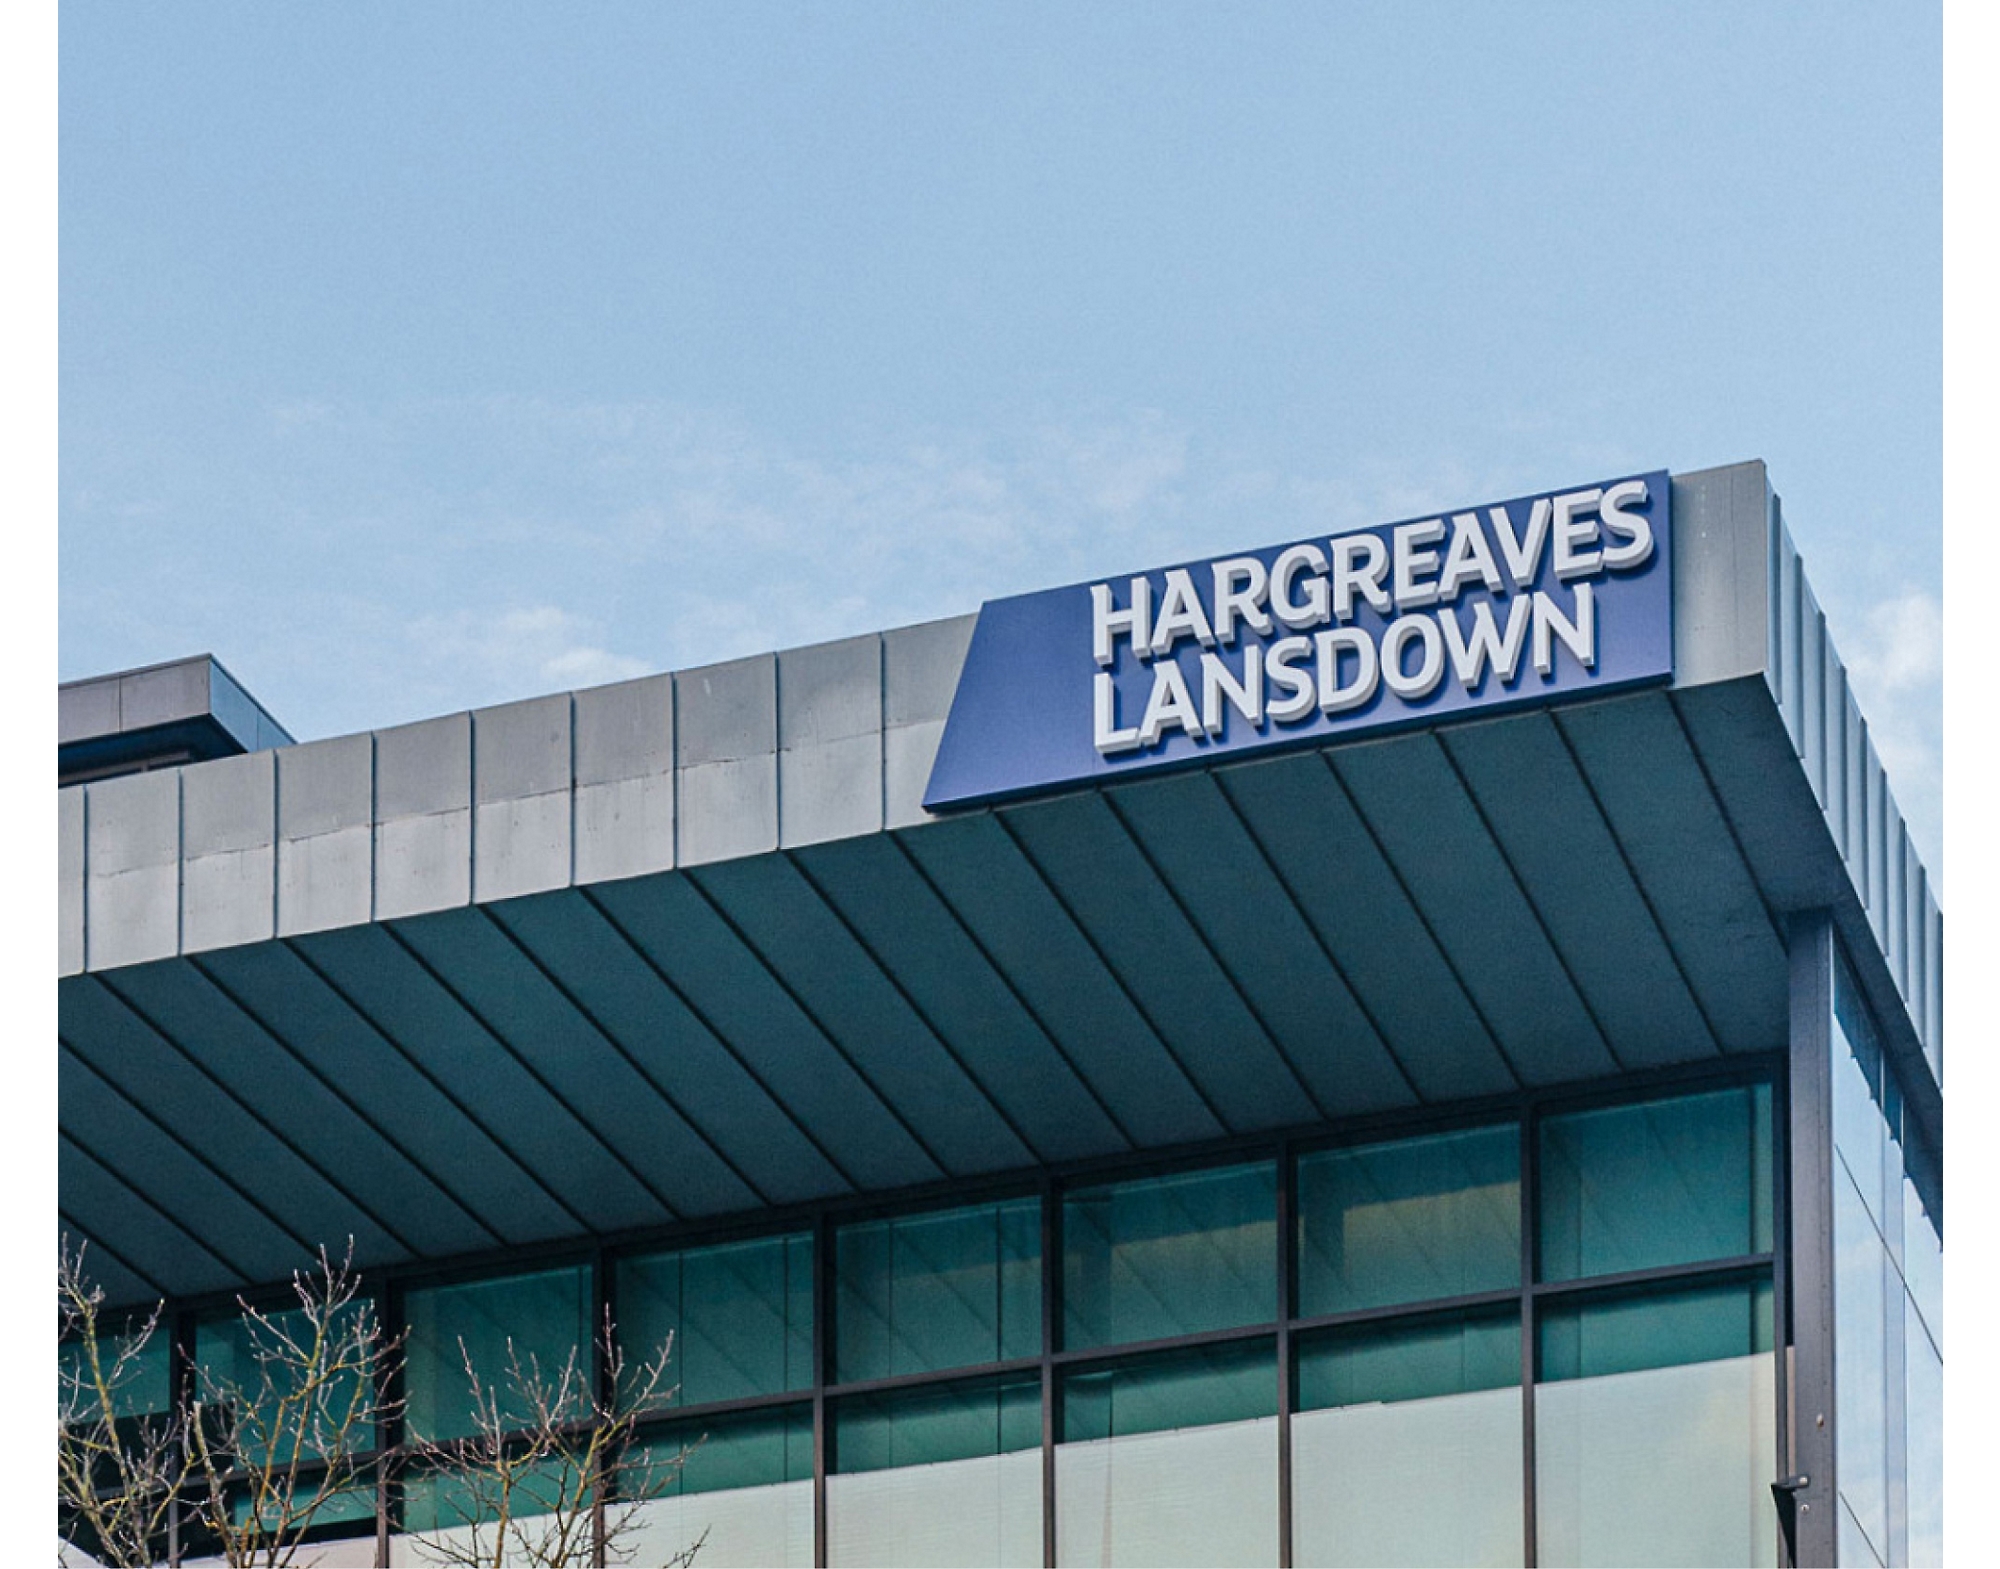 Sign of "hargreaves lansdown" on top of a modern building with clear sky in the background.